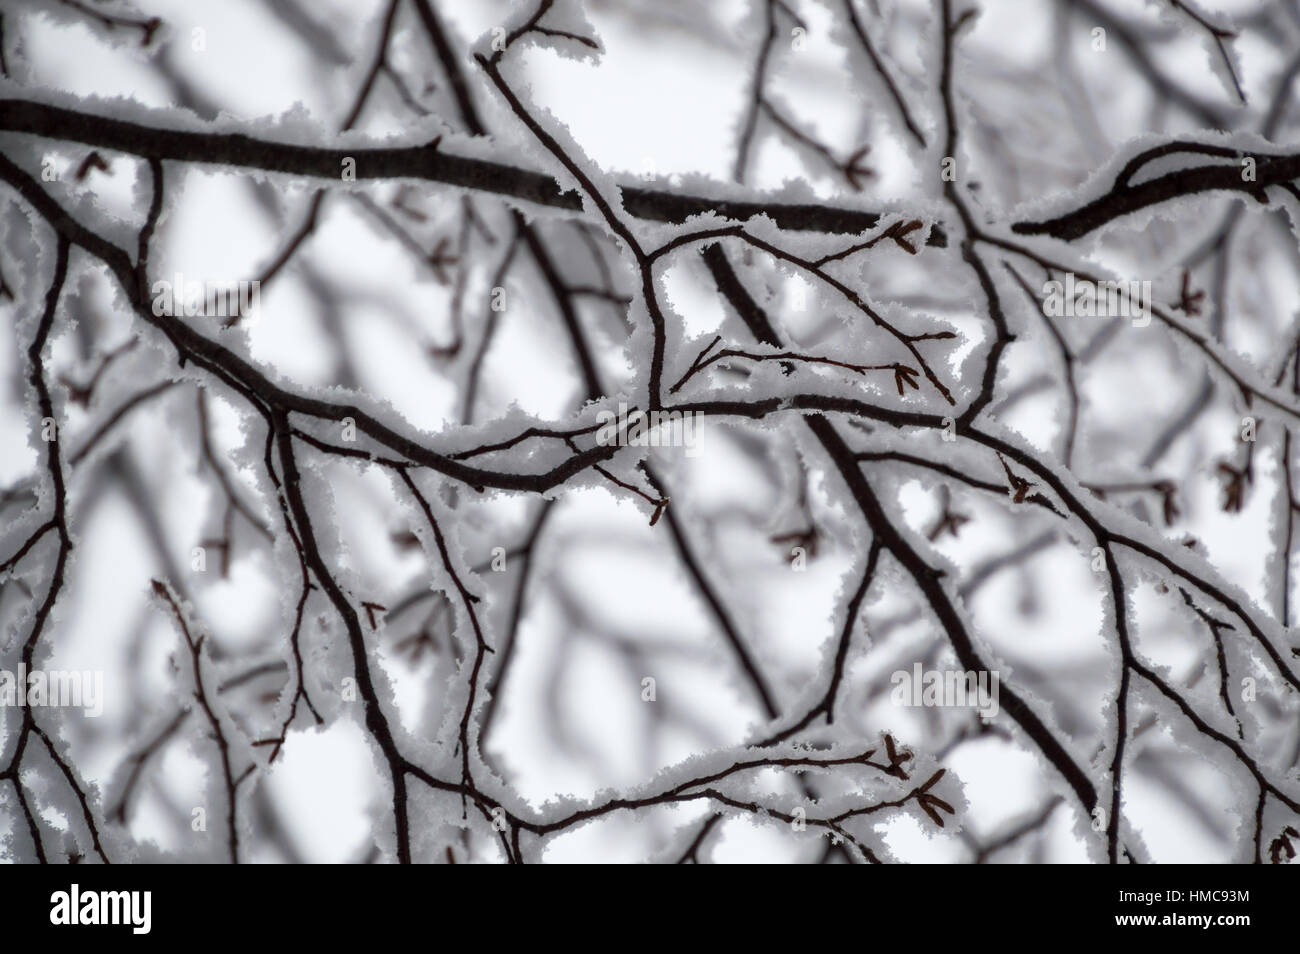 This black and white looking abstract design is random and squiggly and quite pretty.  It shows the underneath of snow covered tree branches and catki Stock Photo